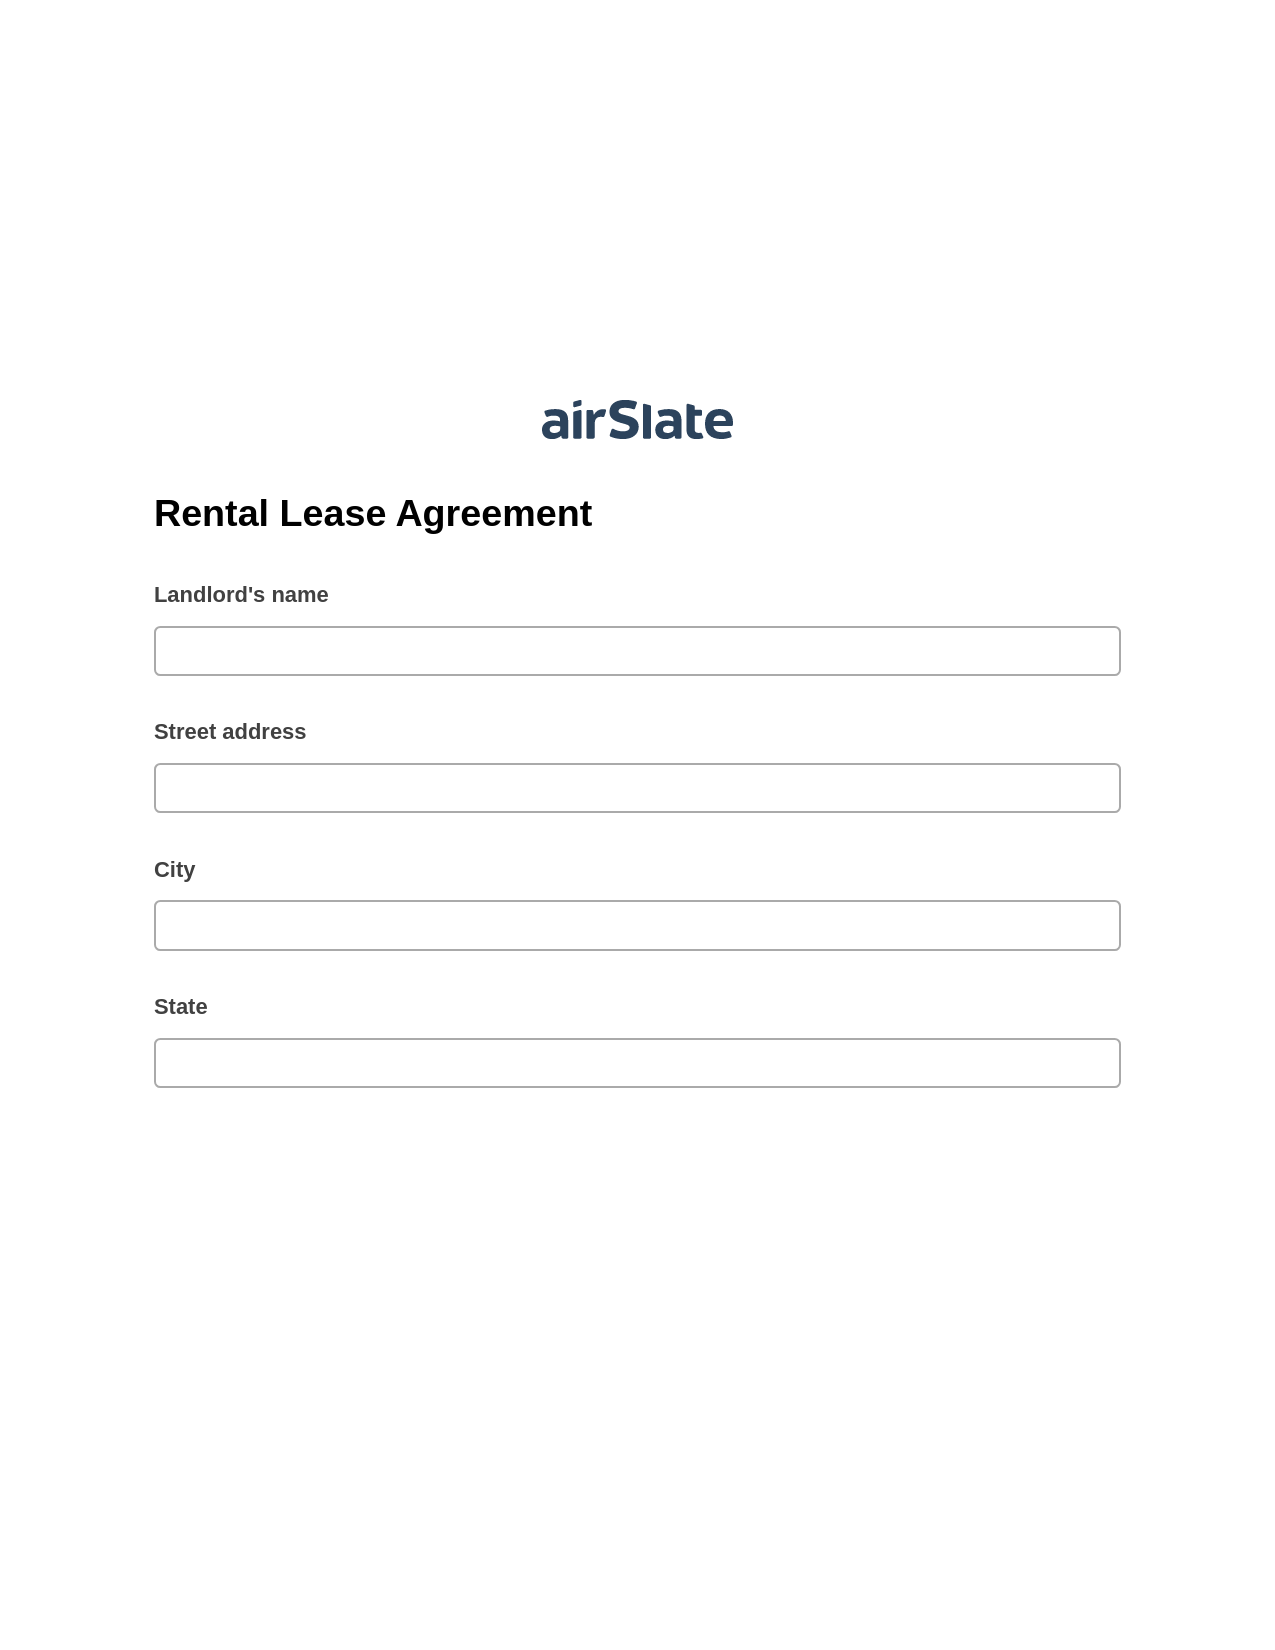 Multirole Rental Lease Agreement Pre-fill Dropdown from Airtable, Create NetSuite Records Bot, Export to Excel 365 Bot